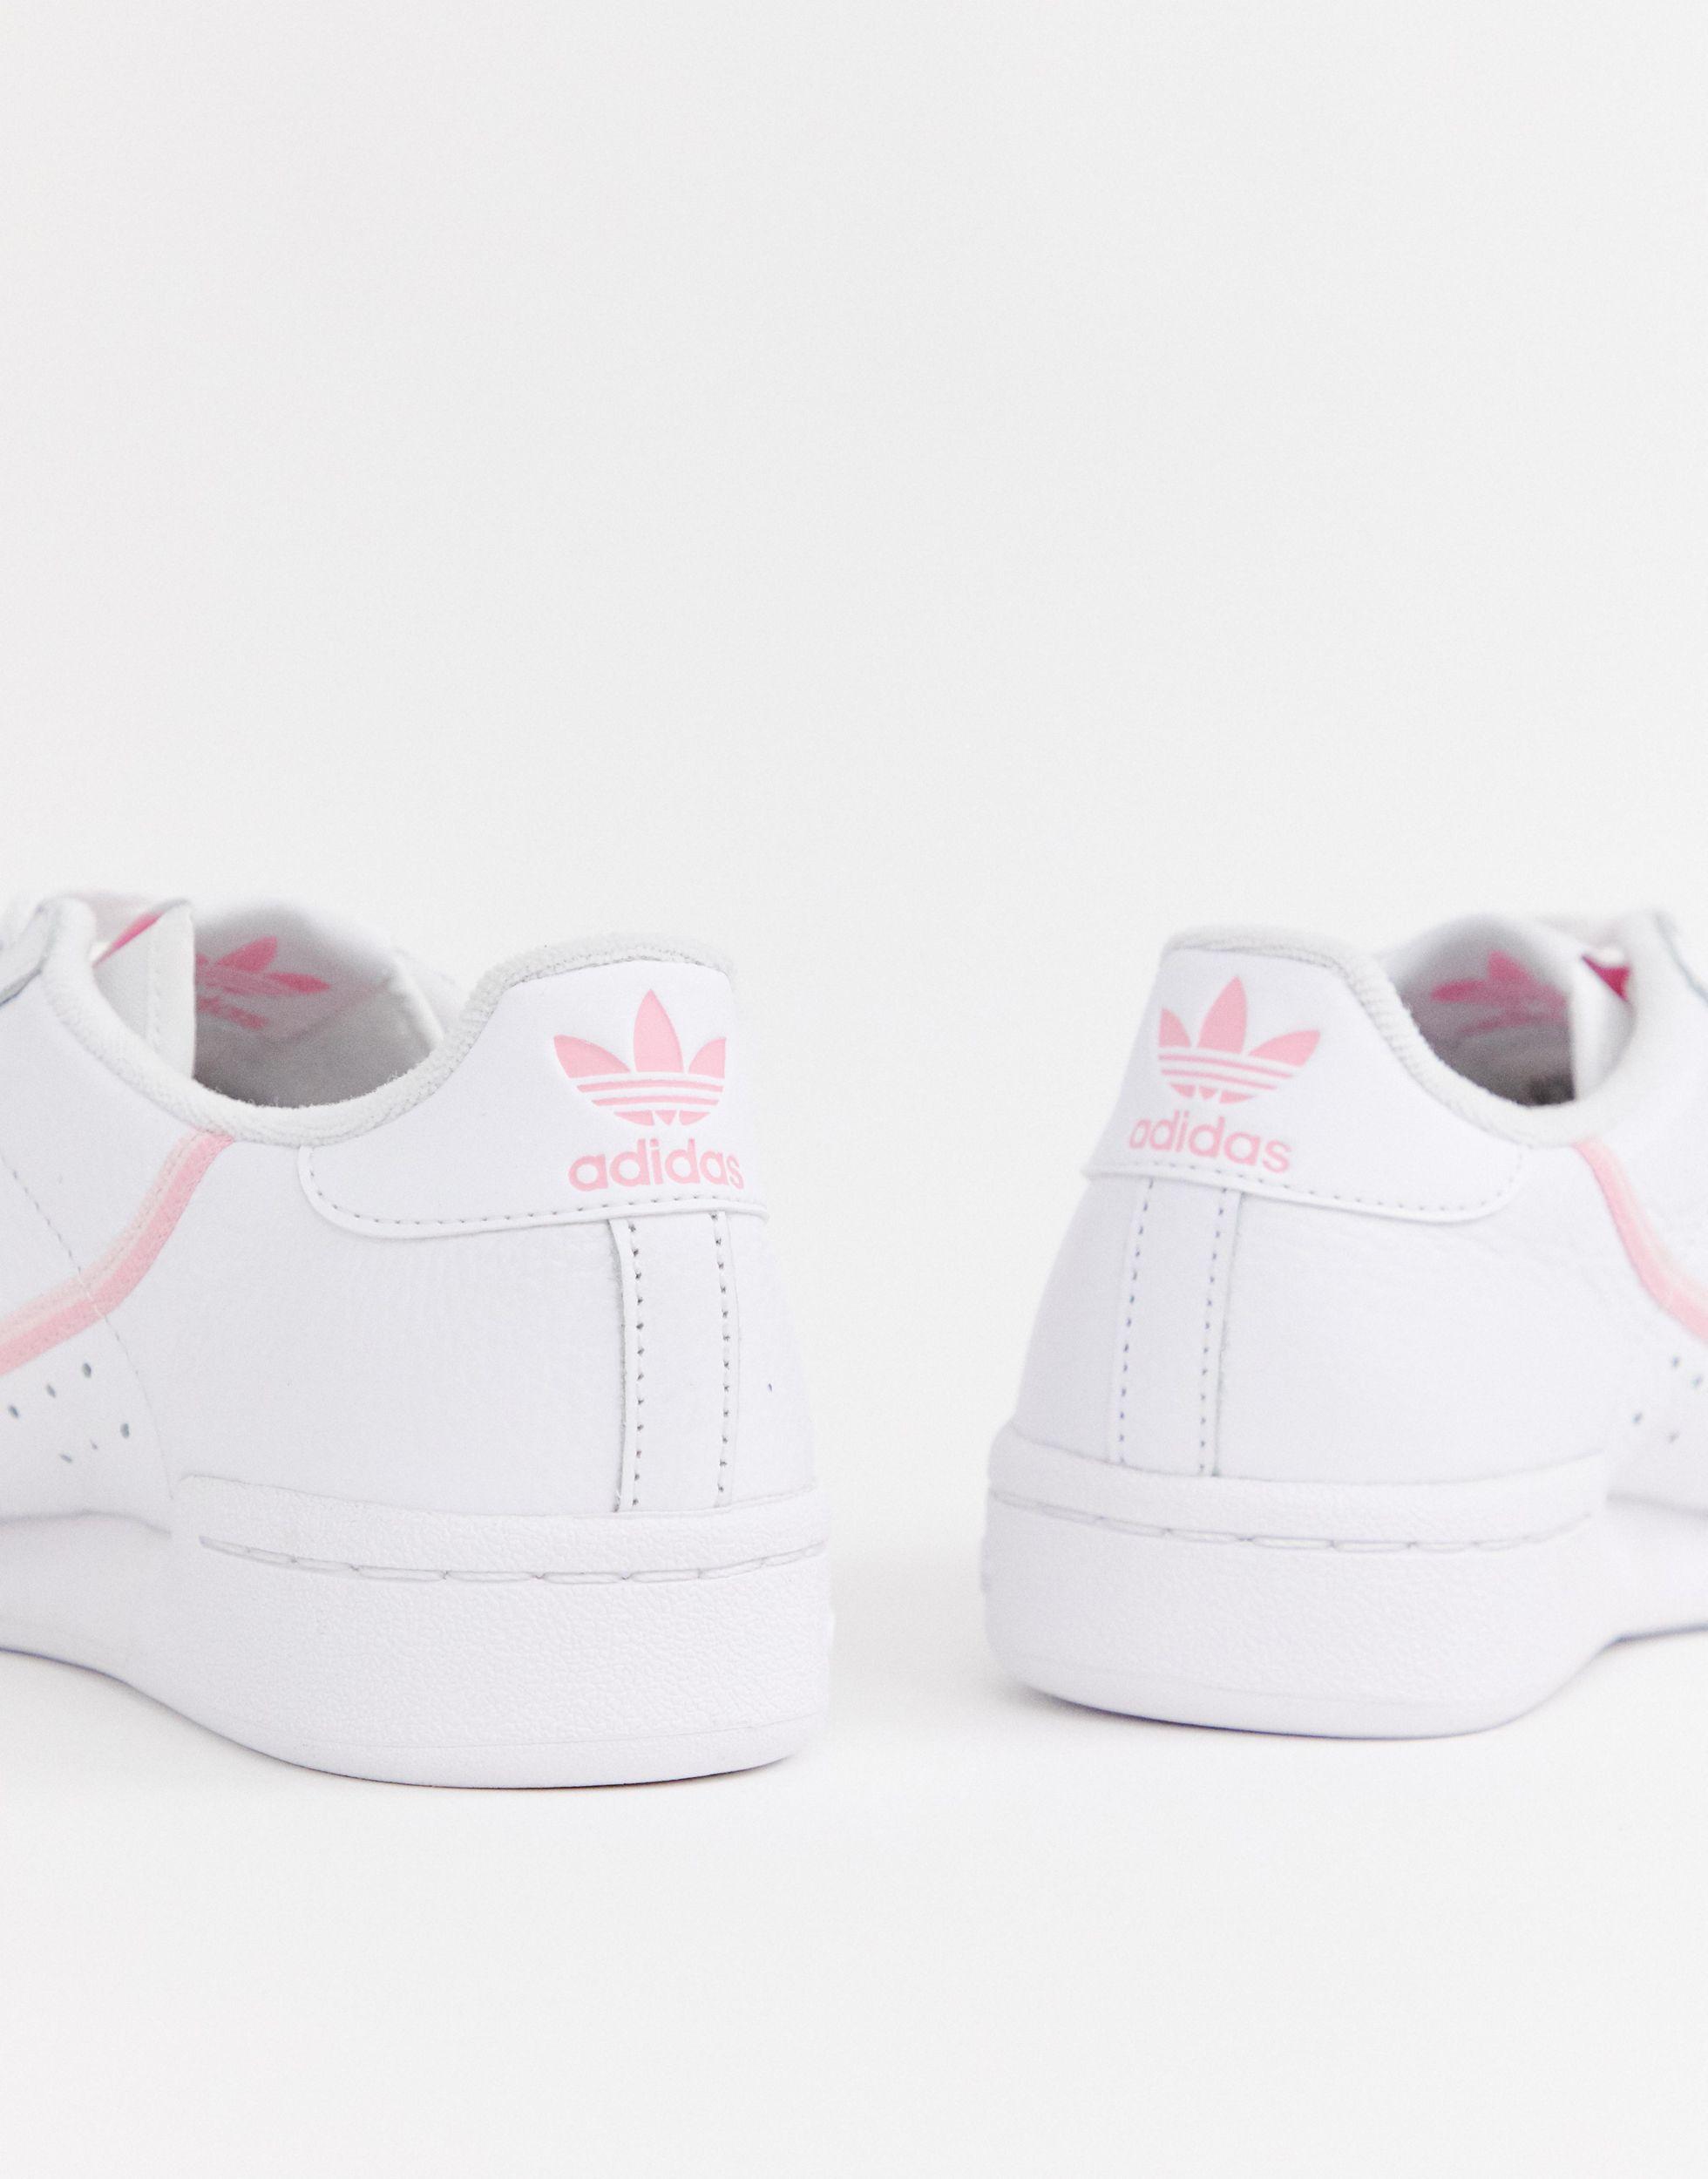 adidas Originals Leather White And Pink Continental 80 Trainers | Lyst